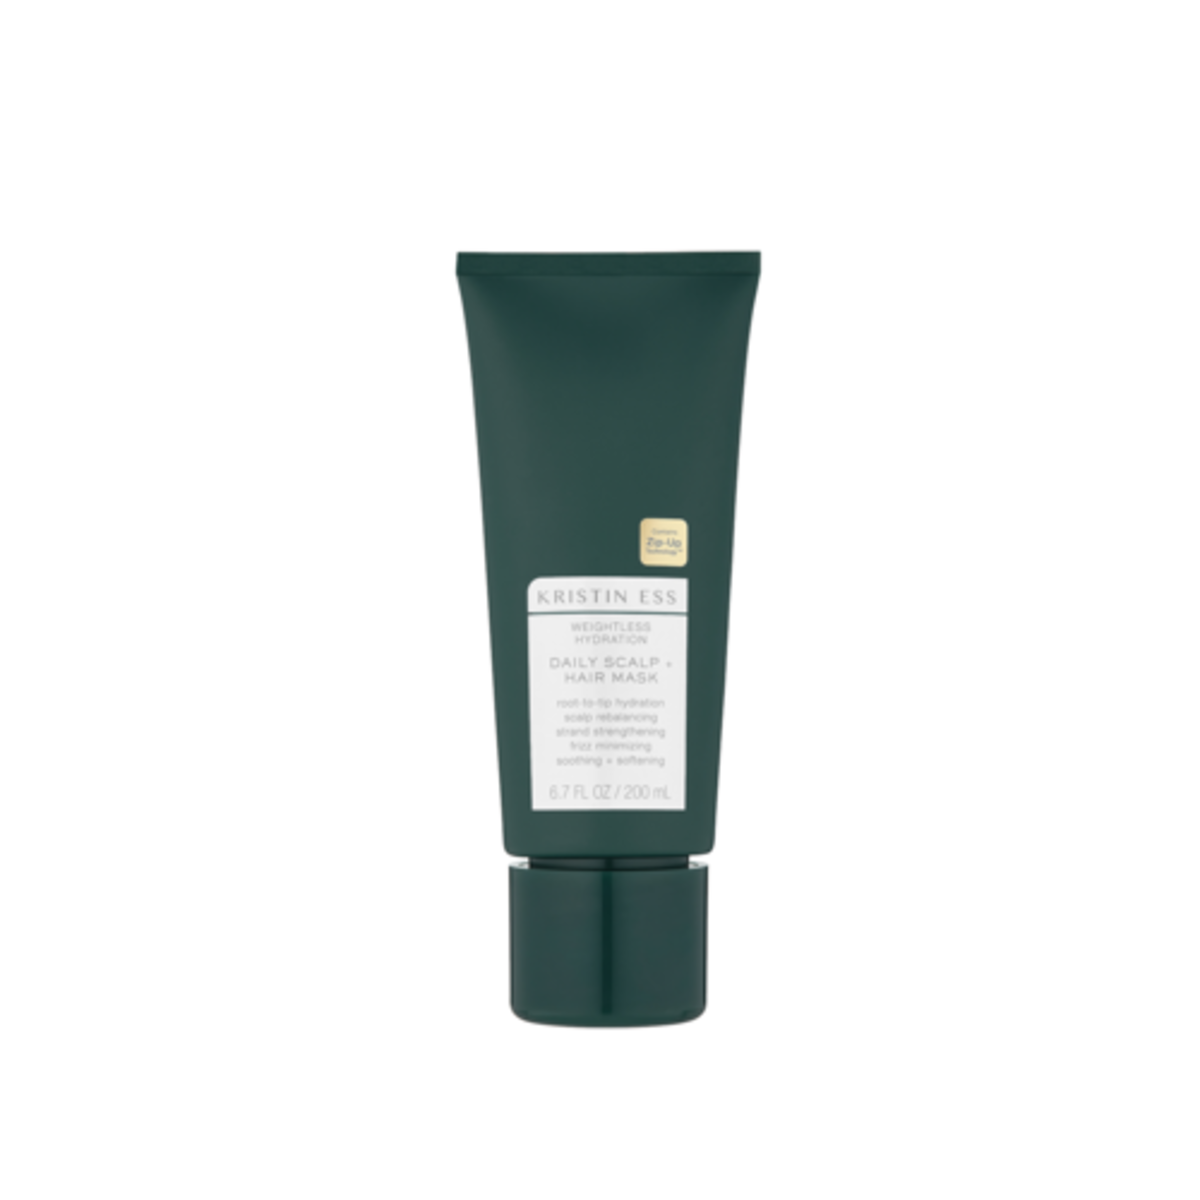 Kristin Ess Weightless Hydration Daily Scalp + Hair Mask, $14, available here.